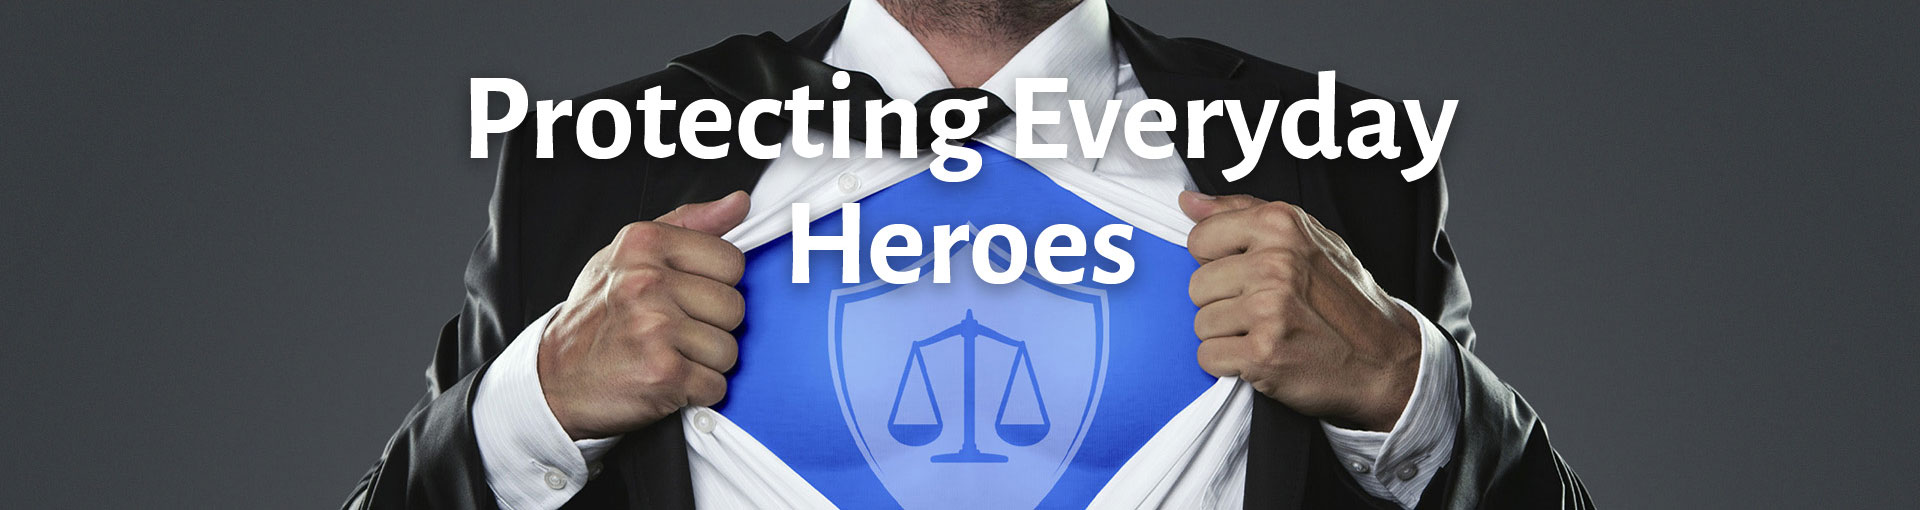 protecting everyday heroes